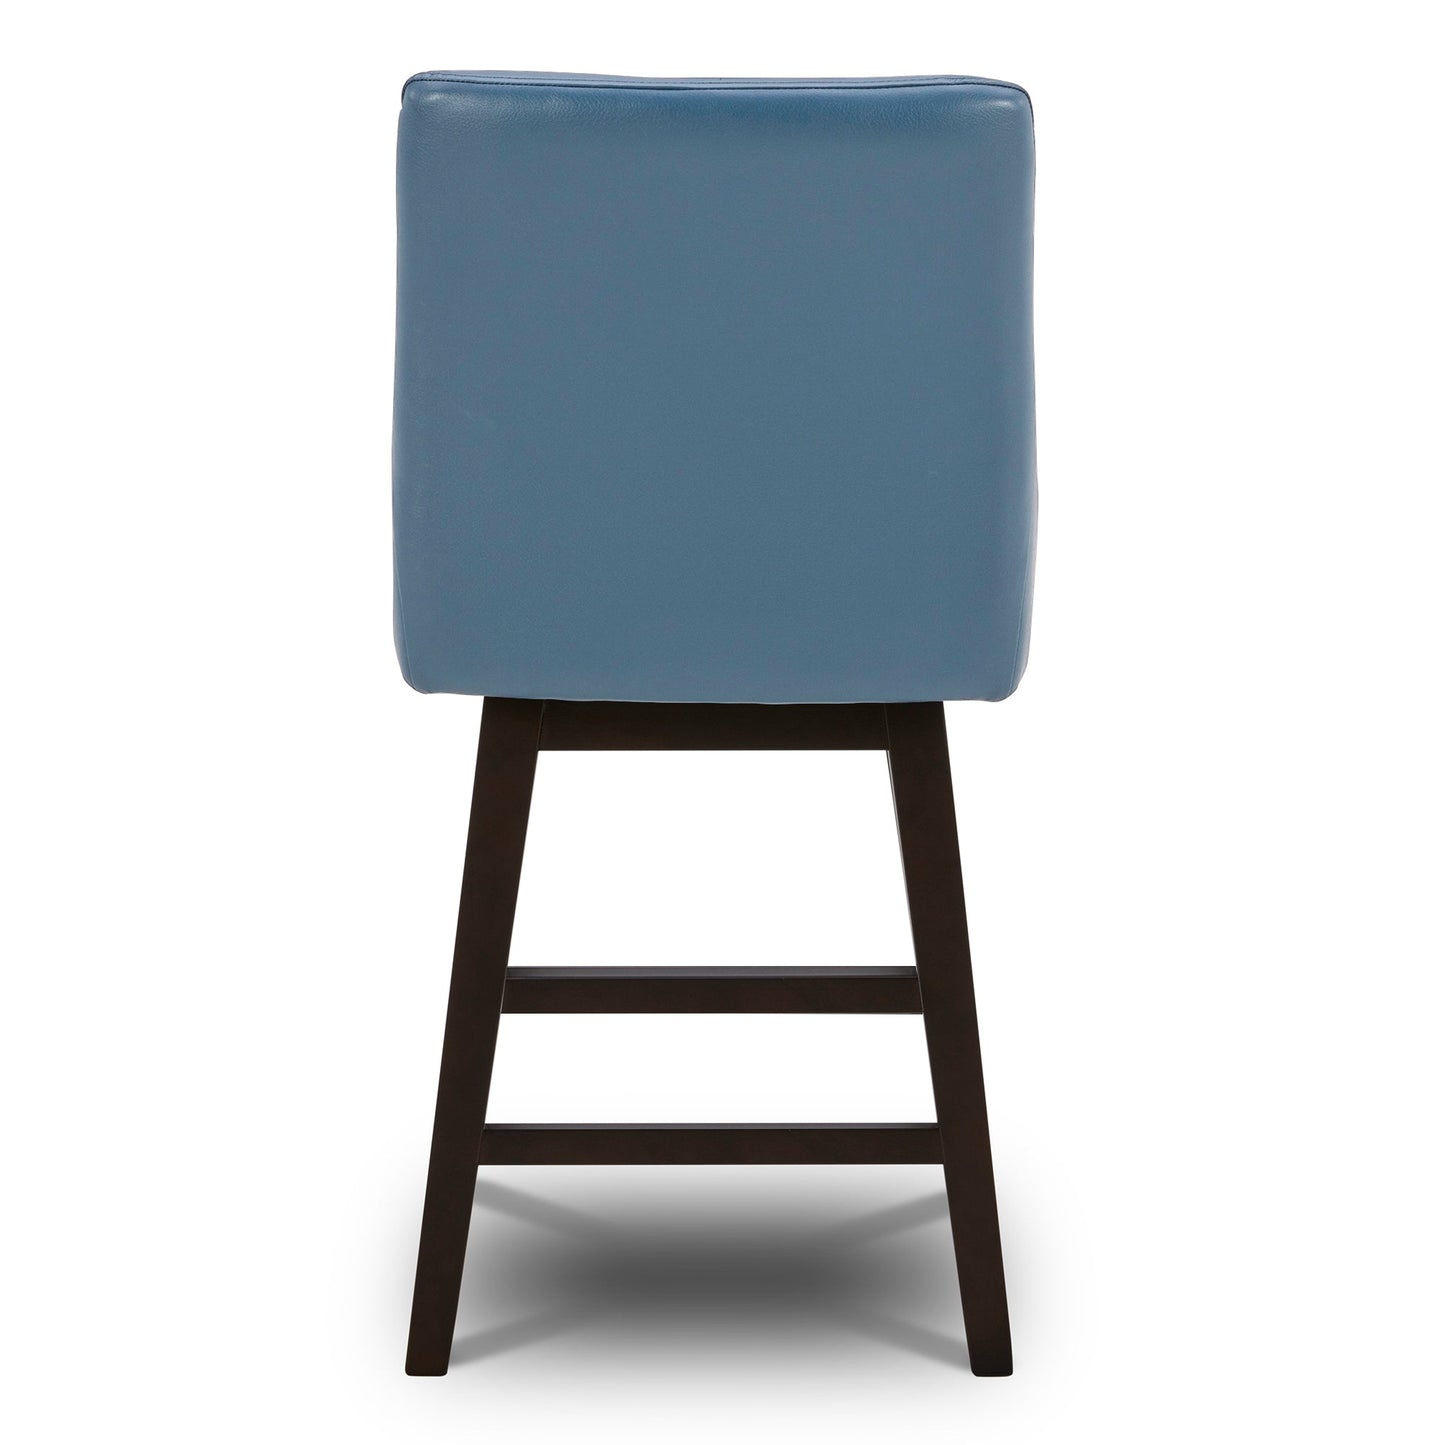 CHITA LIVING-Lissa Swivel Counter Stool 26.8''-Counter Stools-Faux Leather-Blue-